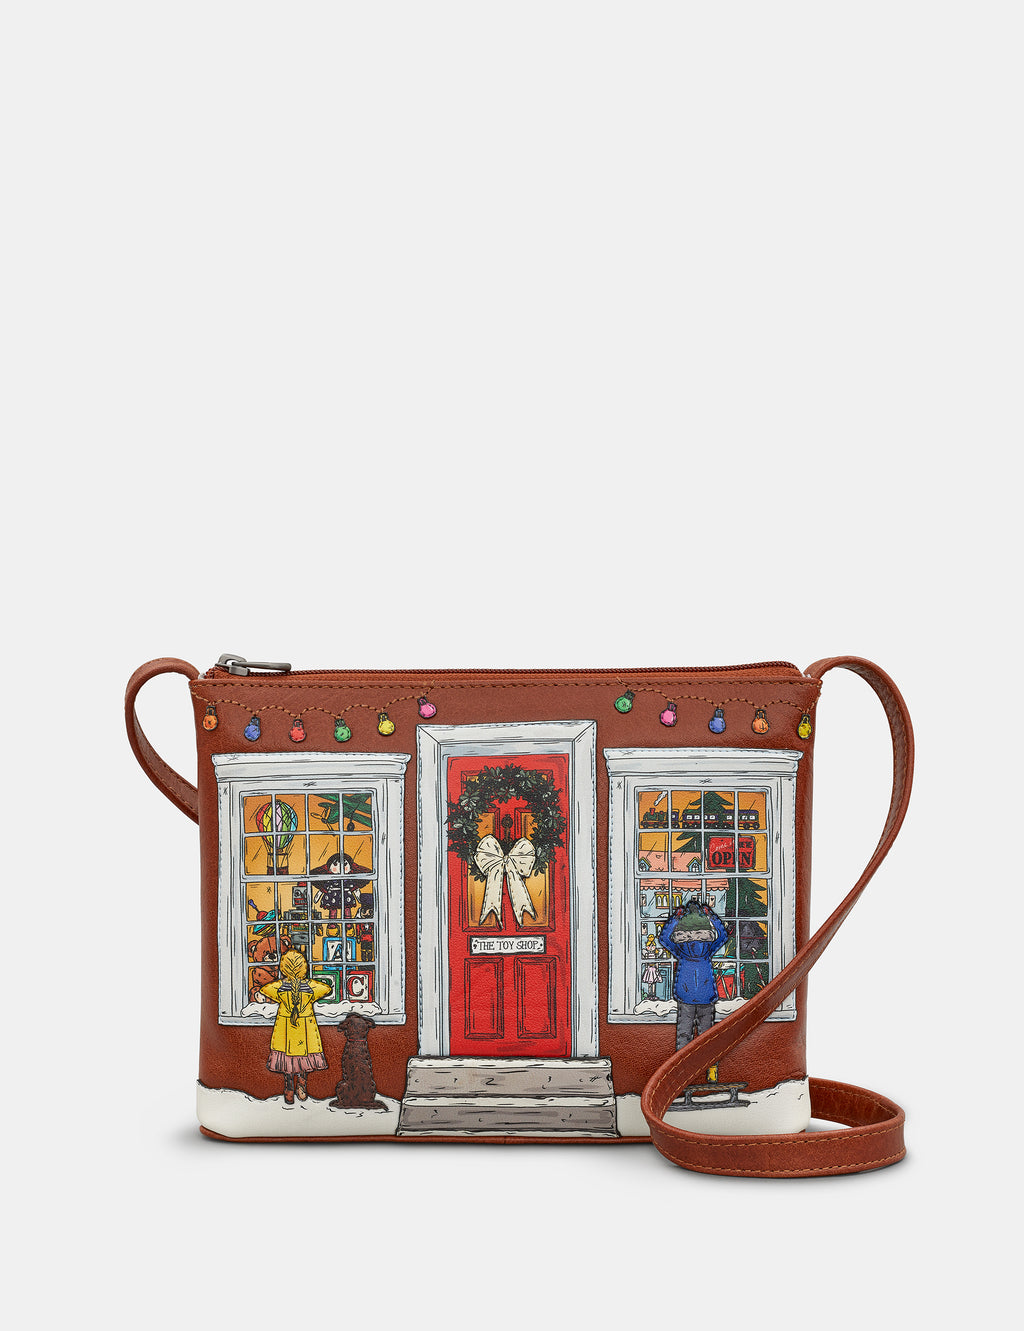 The Toy Shop Brown Leather Cross Body Bag